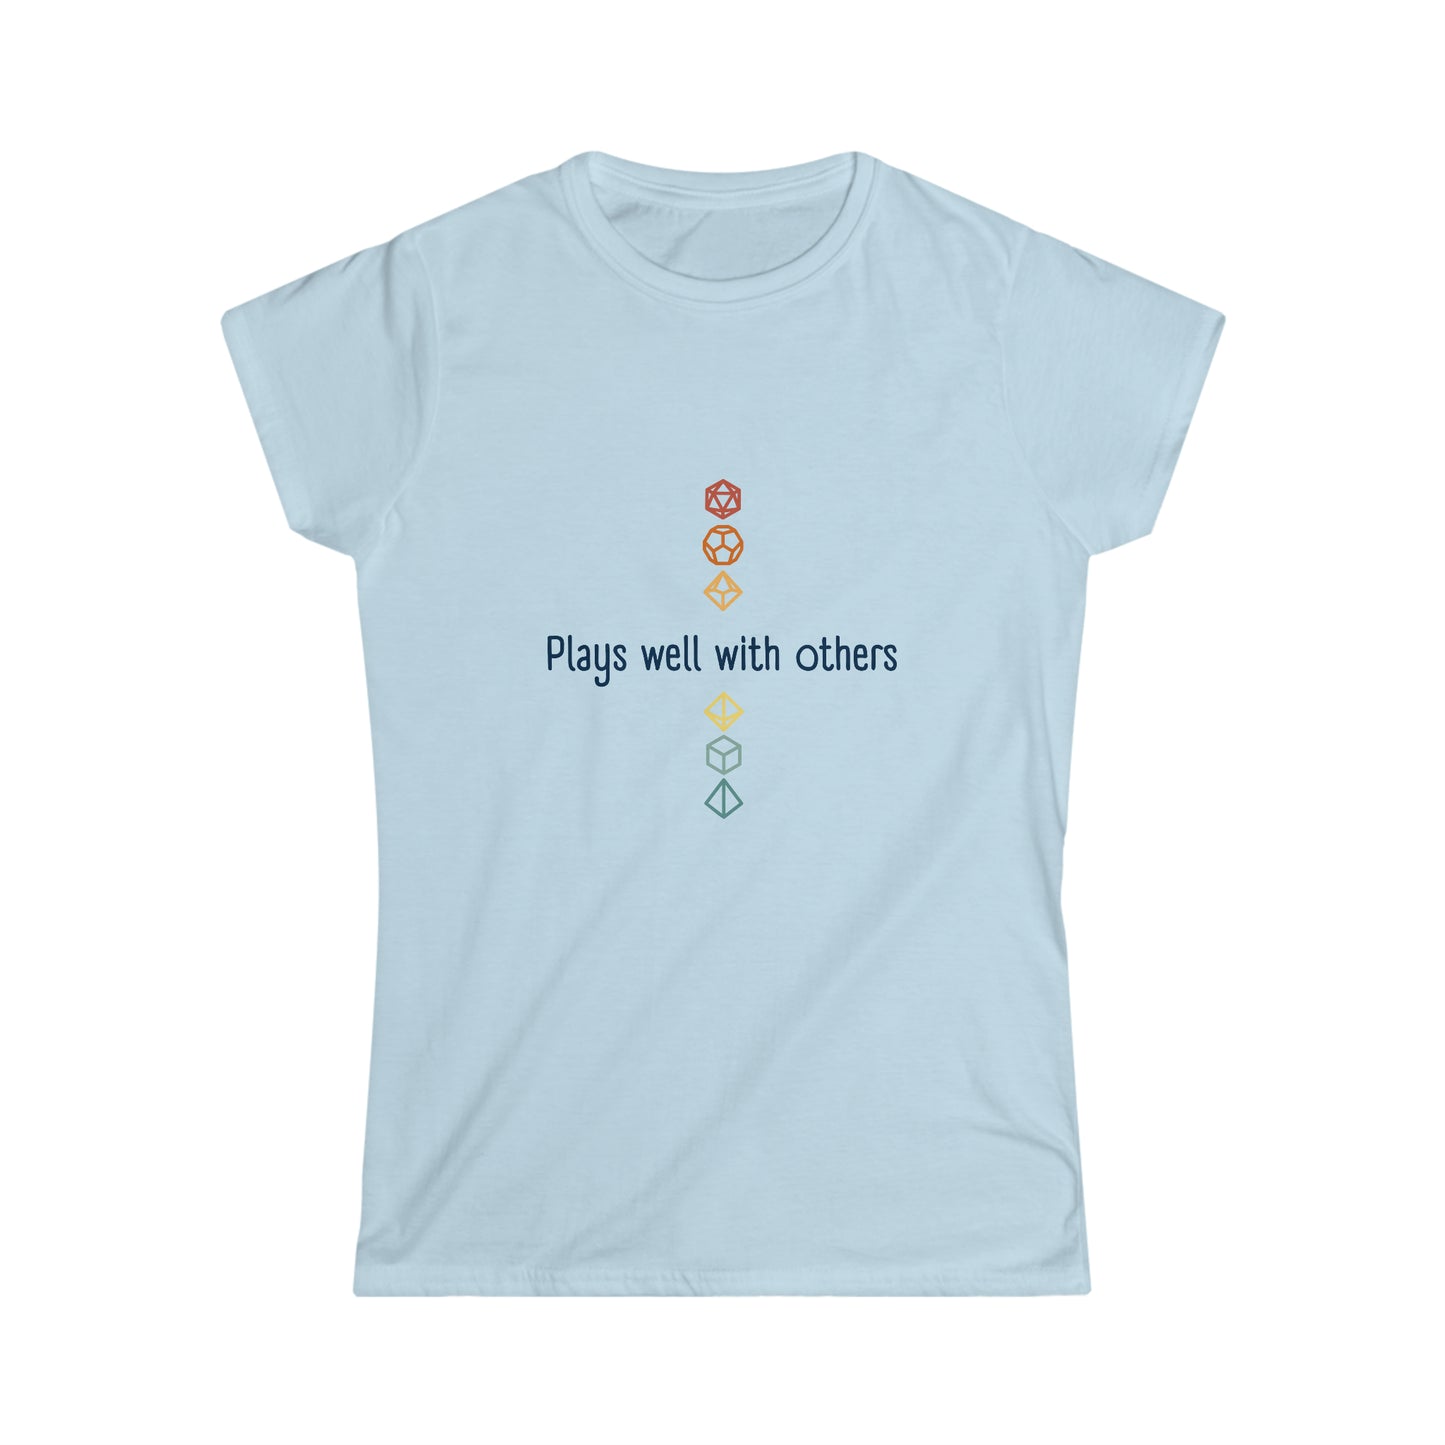 Board Game T Shirts - Slim fit - Plays well with others